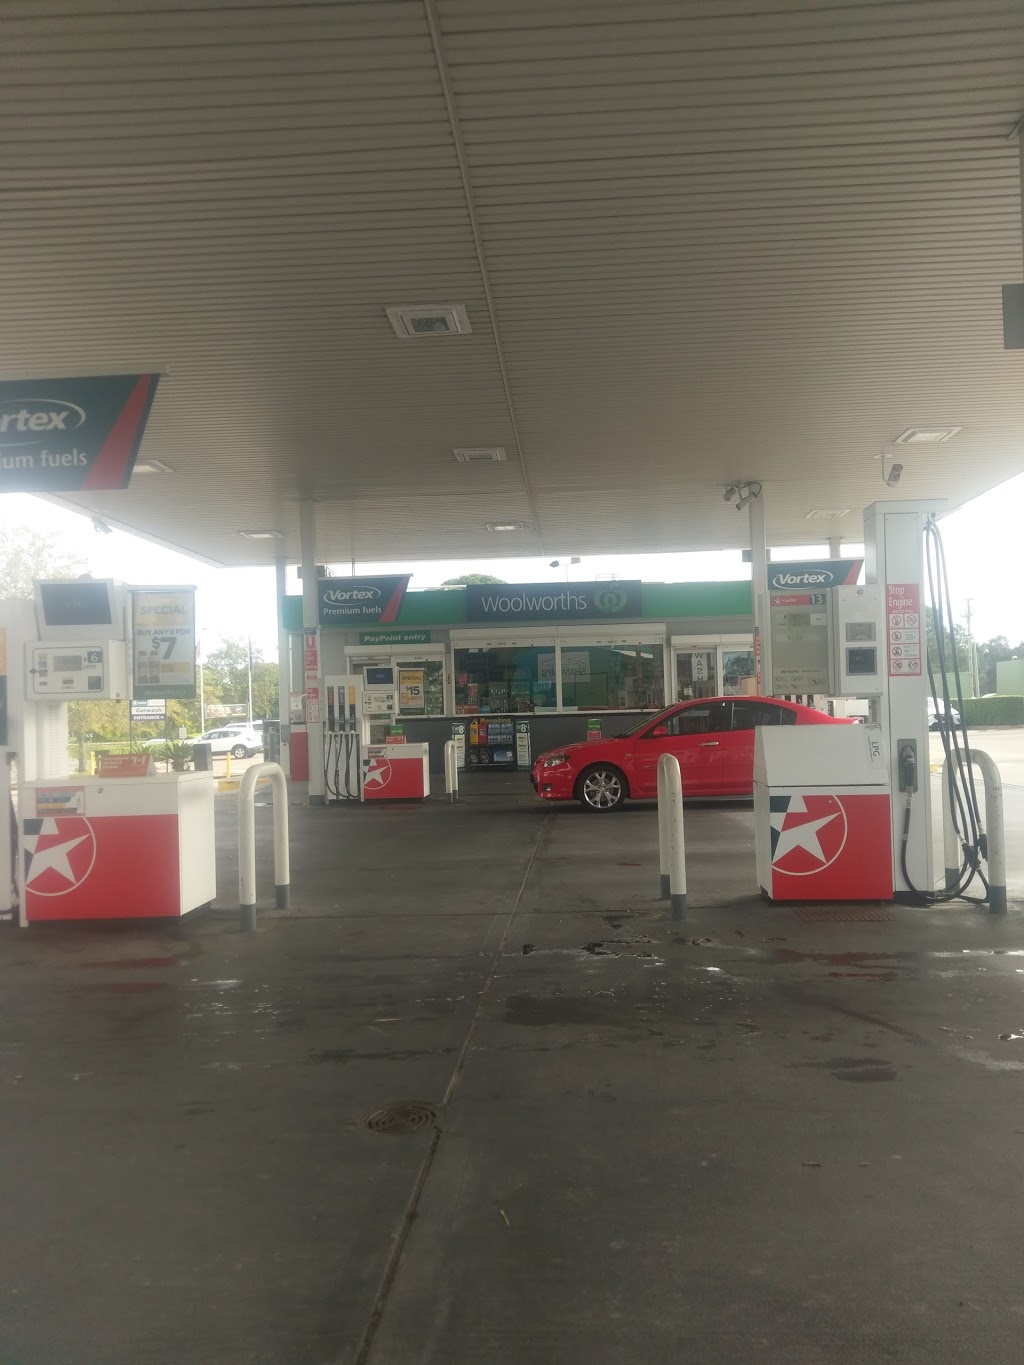 Caltex Woolworths | 5 Stockland Dr, Glendale NSW 2285, Australia | Phone: 1300 655 055